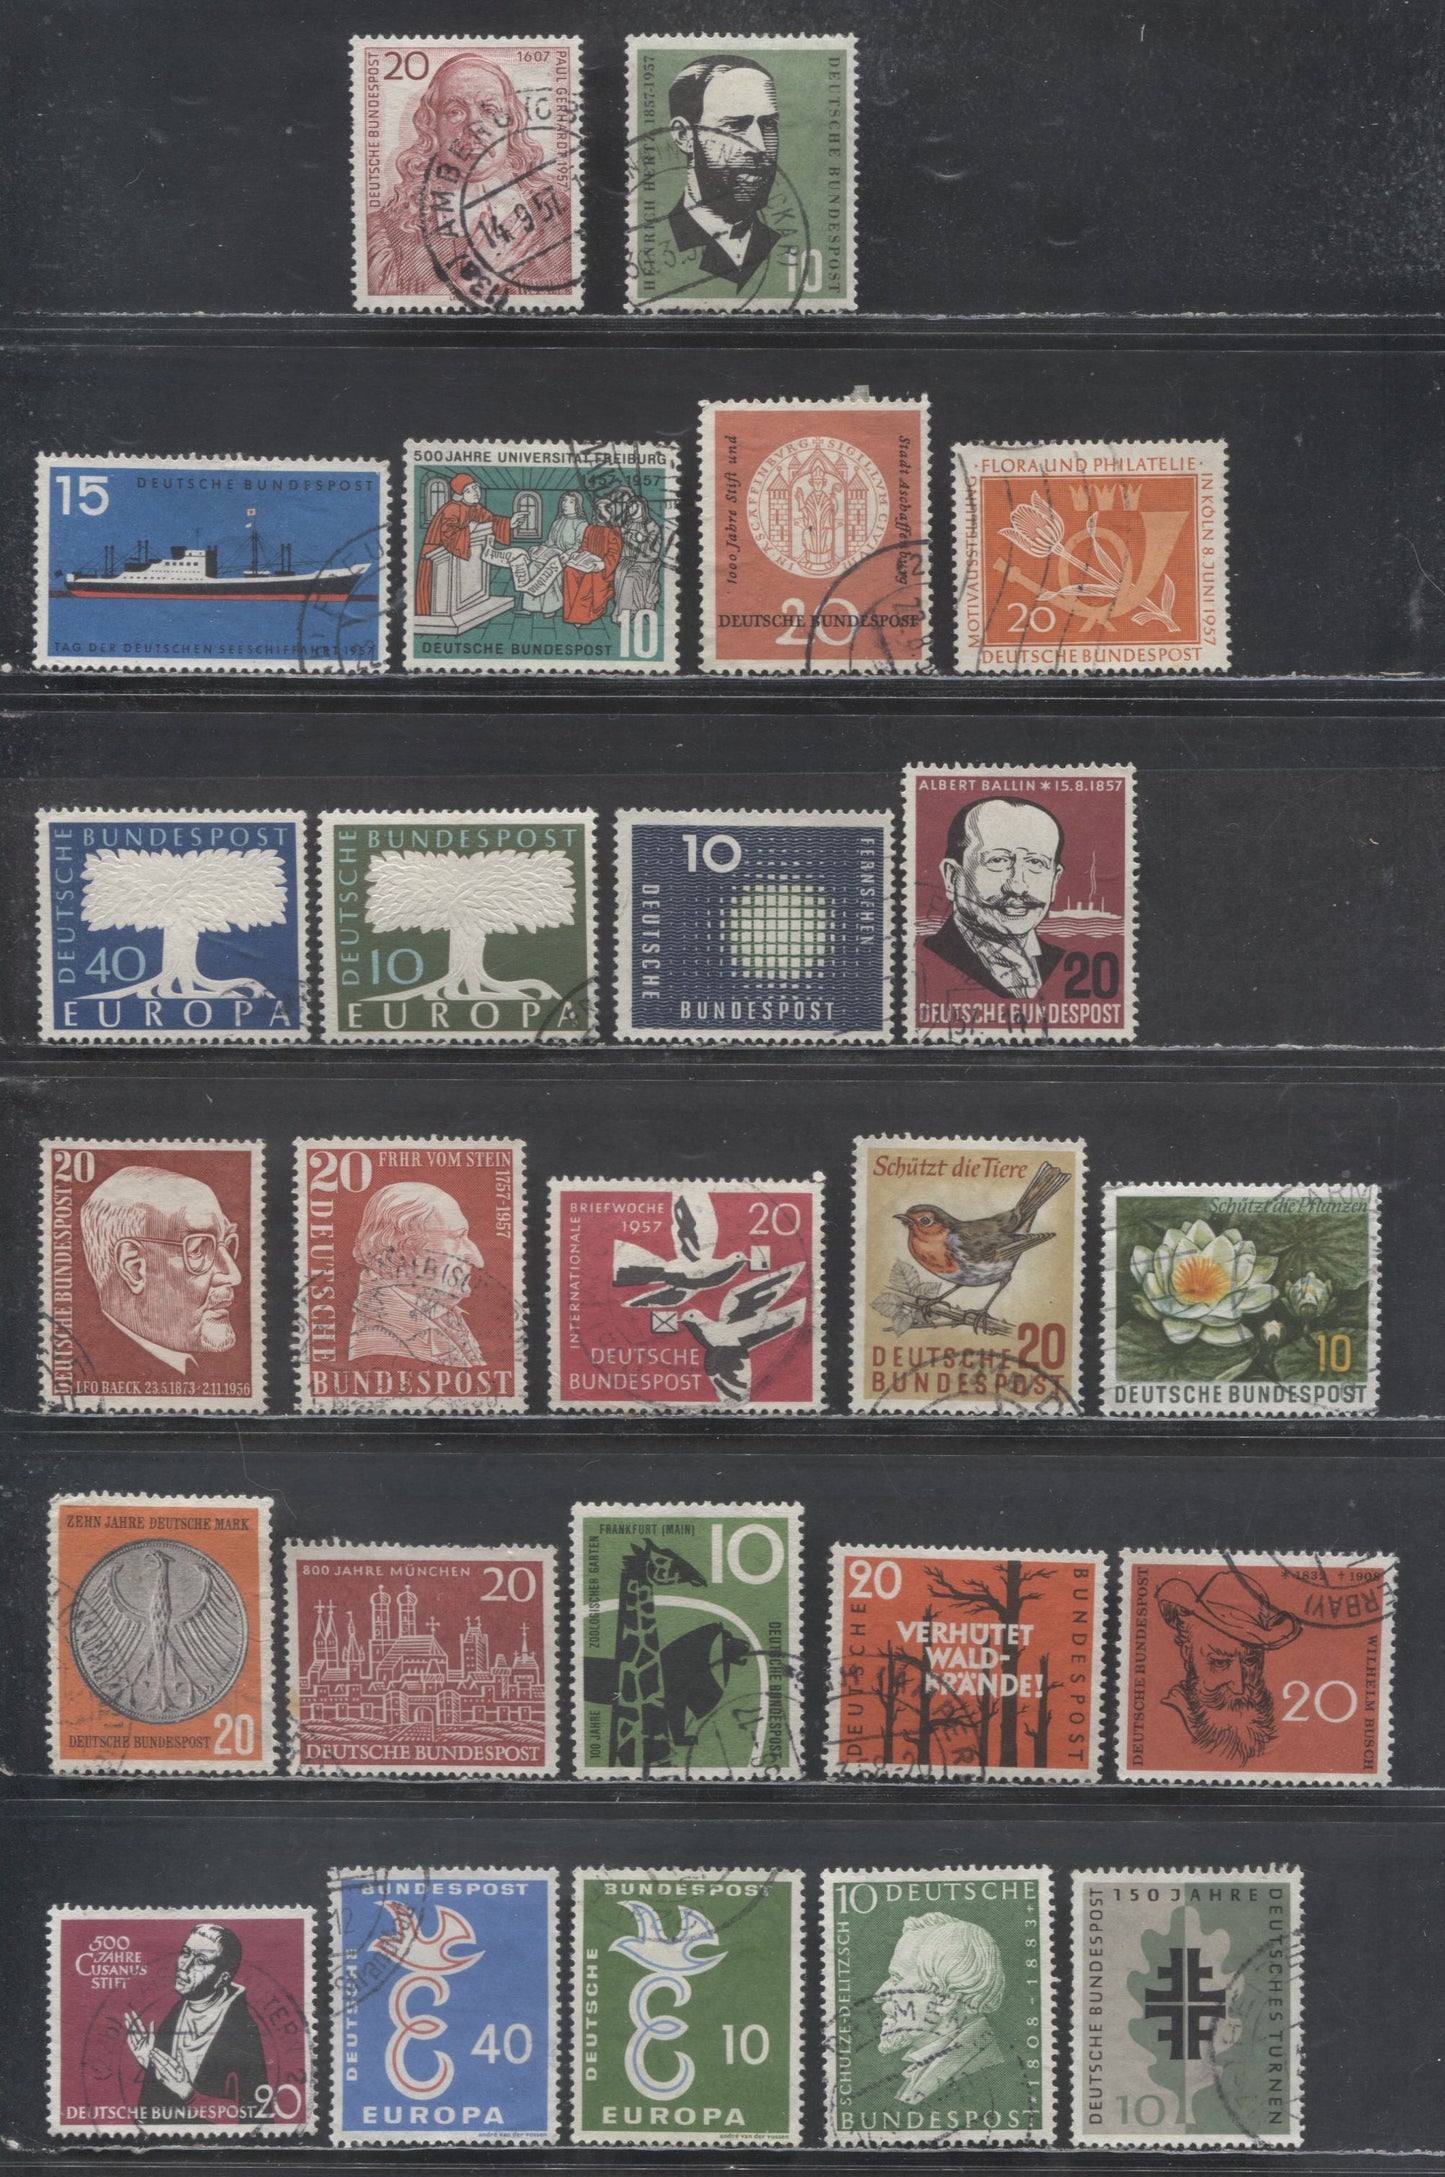 Lot 27 Germany SC#762/792 1957-1958 Heinrich Hertz & Ausanus Issues, 25 Very Fine Used Singles, Click on Listing to See ALL Pictures, 2022 Scott Cat. $14.1